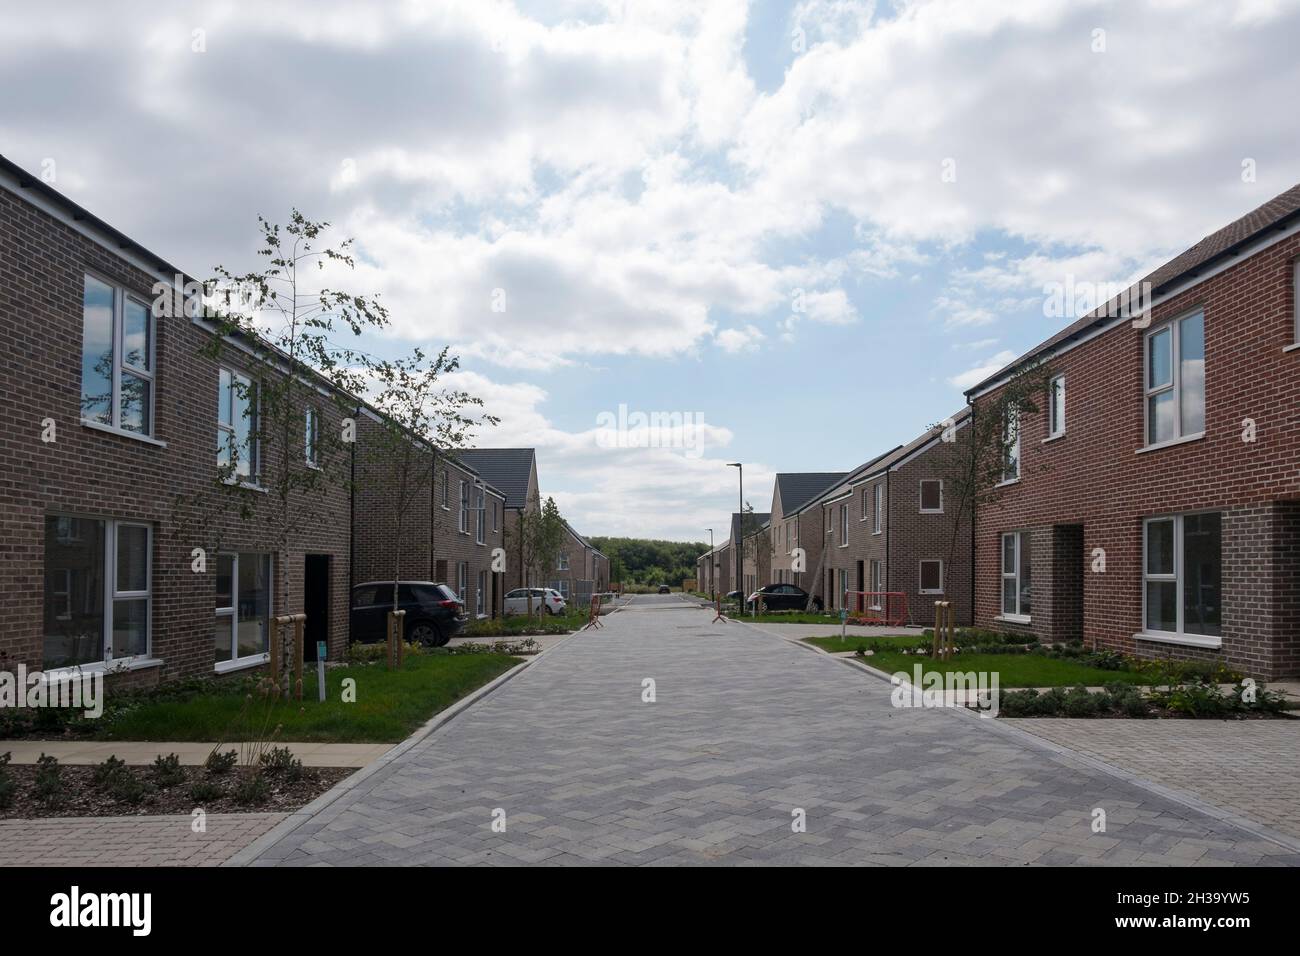 New houses in Joseph Lancaster Lane, the new development in north Chichester, West Sussex, England, UK. Stock Photo